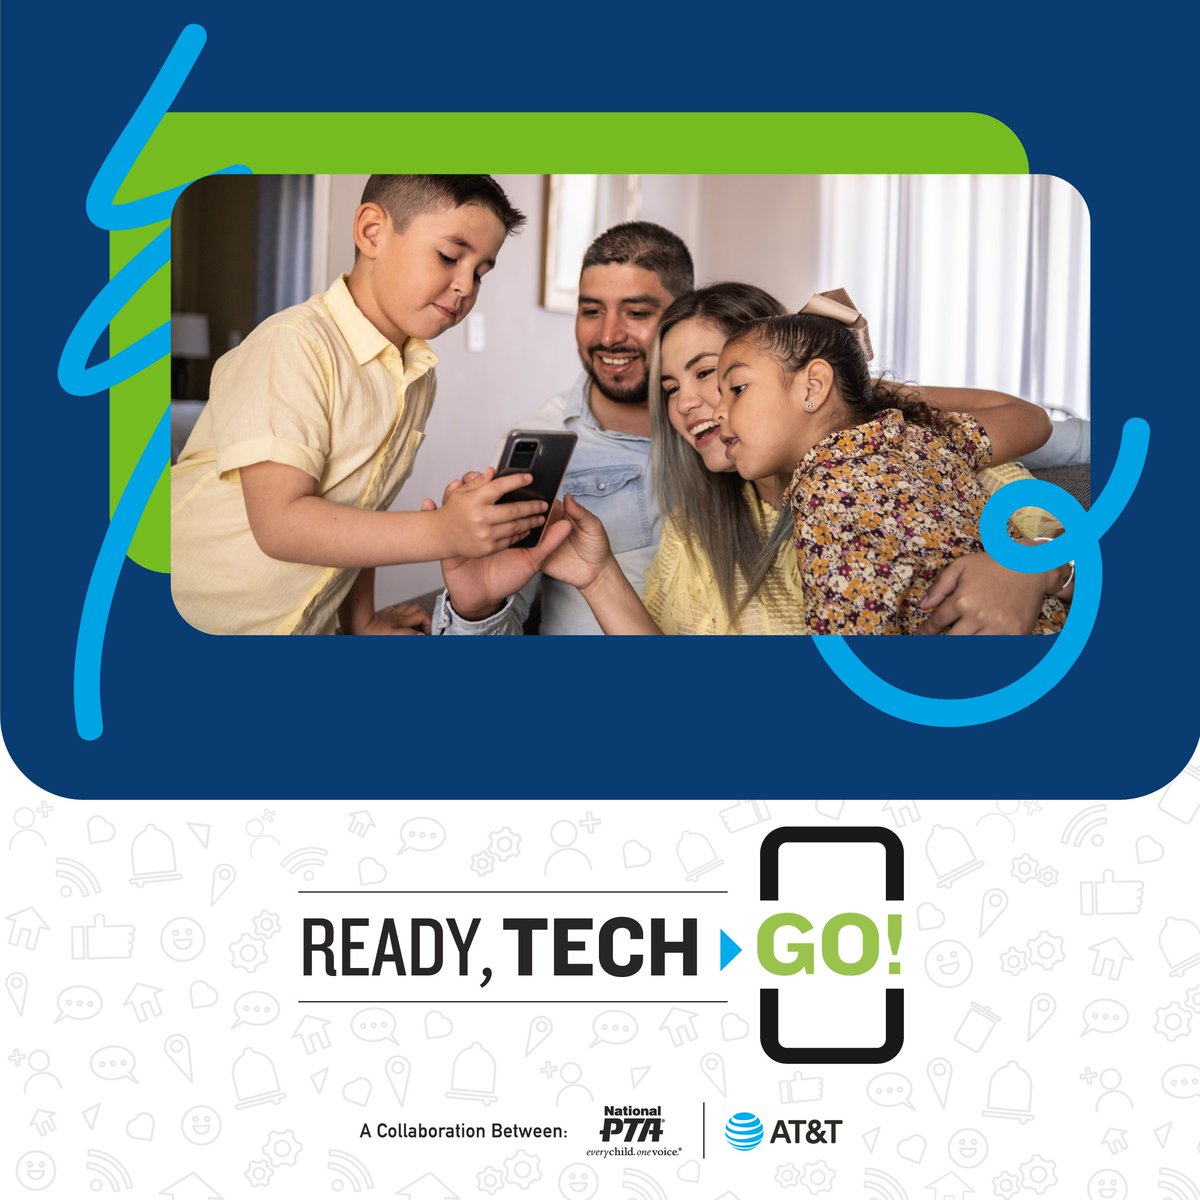 How do you promote responsible device use within your family? Ready, Tech, Go! from PTA and AT&T provides resources to determine screen readiness and discuss digital life, creating a healthy digital home! Join this PTA Connected program and get started: bit.ly/40OZfh9